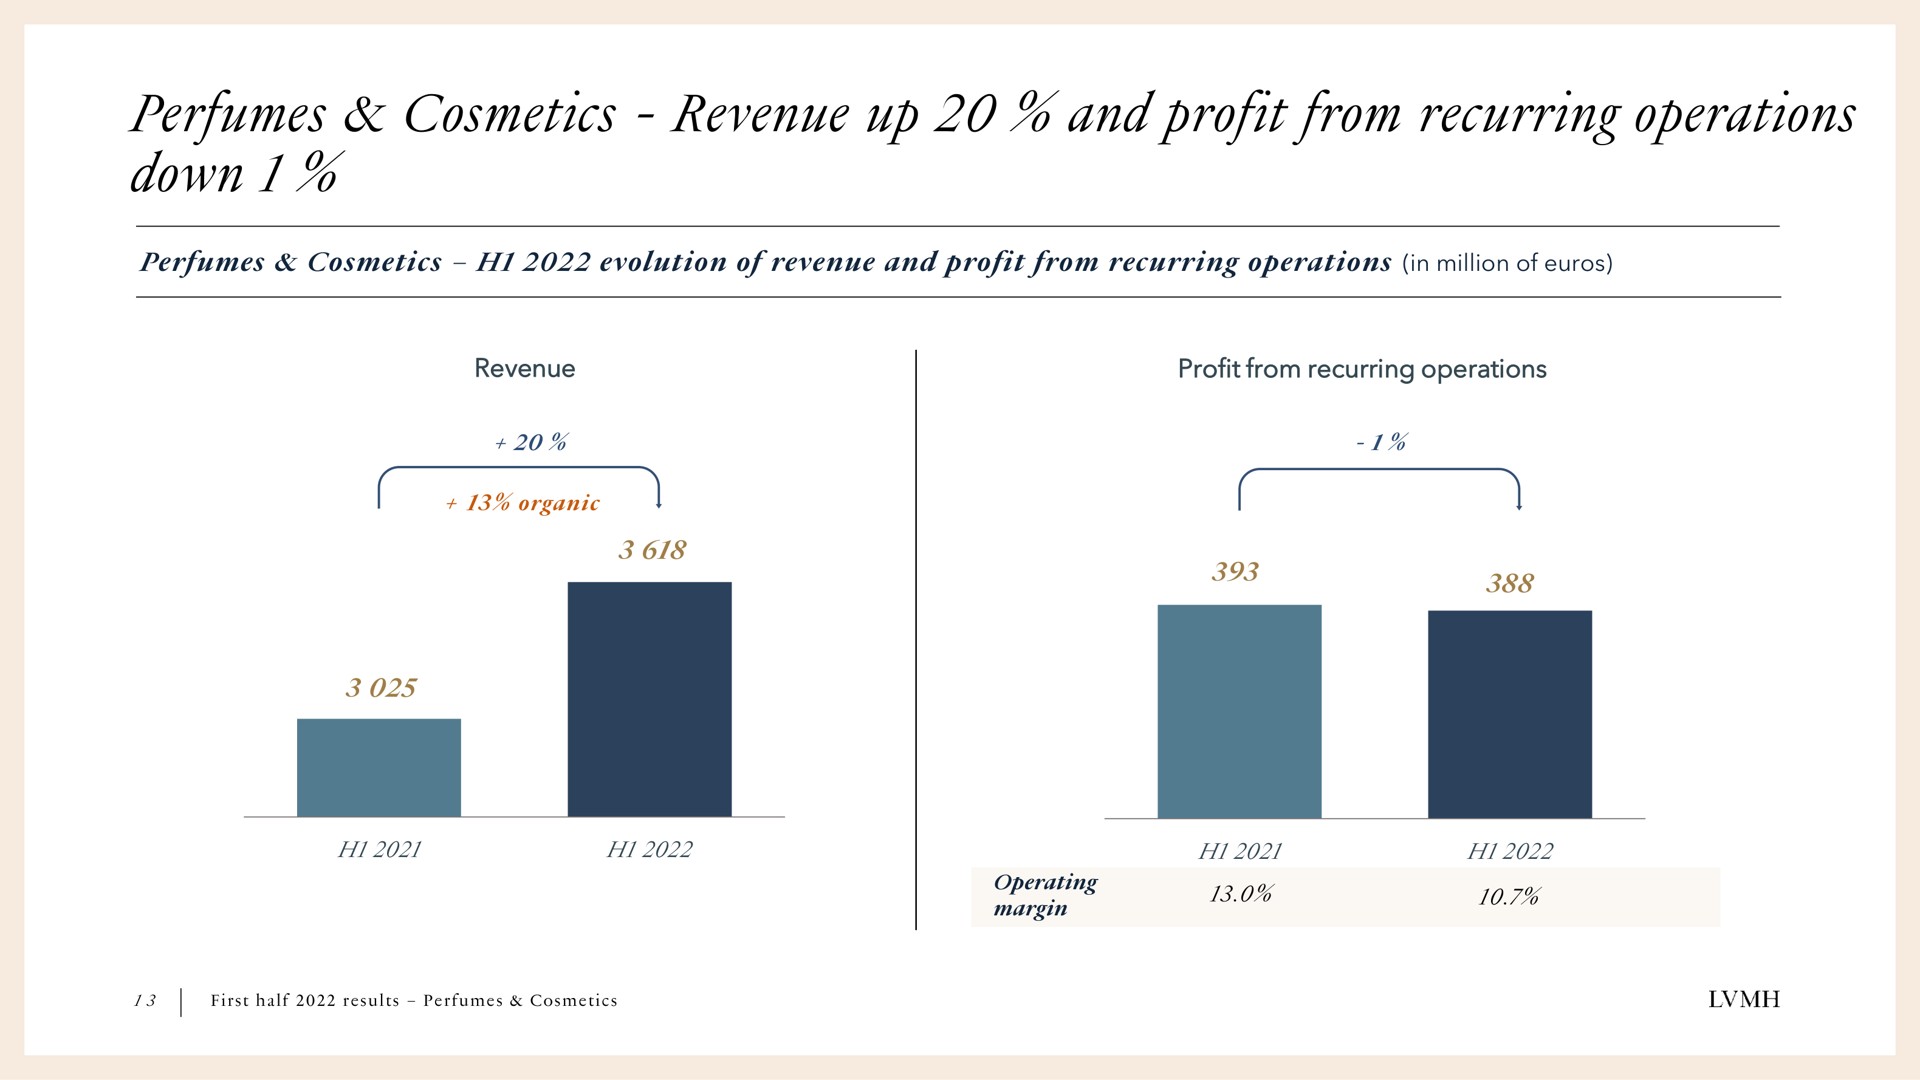 perfumes cosmetics revenue up and profit from recurring operations down | LVMH